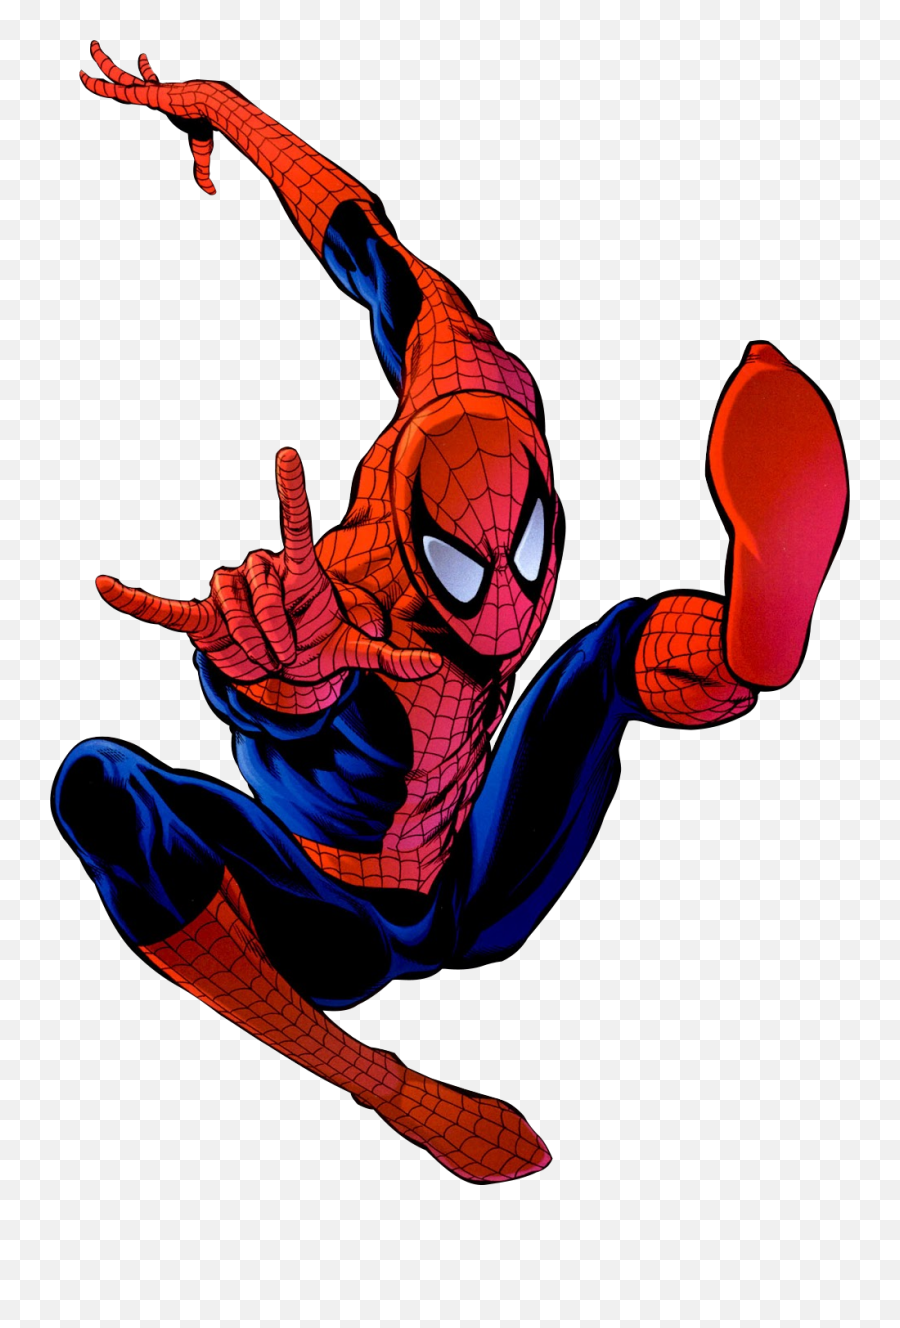 Spiderman End Of The Earth Png Image - Purepng Free Comic Spider Man Transparent,The Earth Png